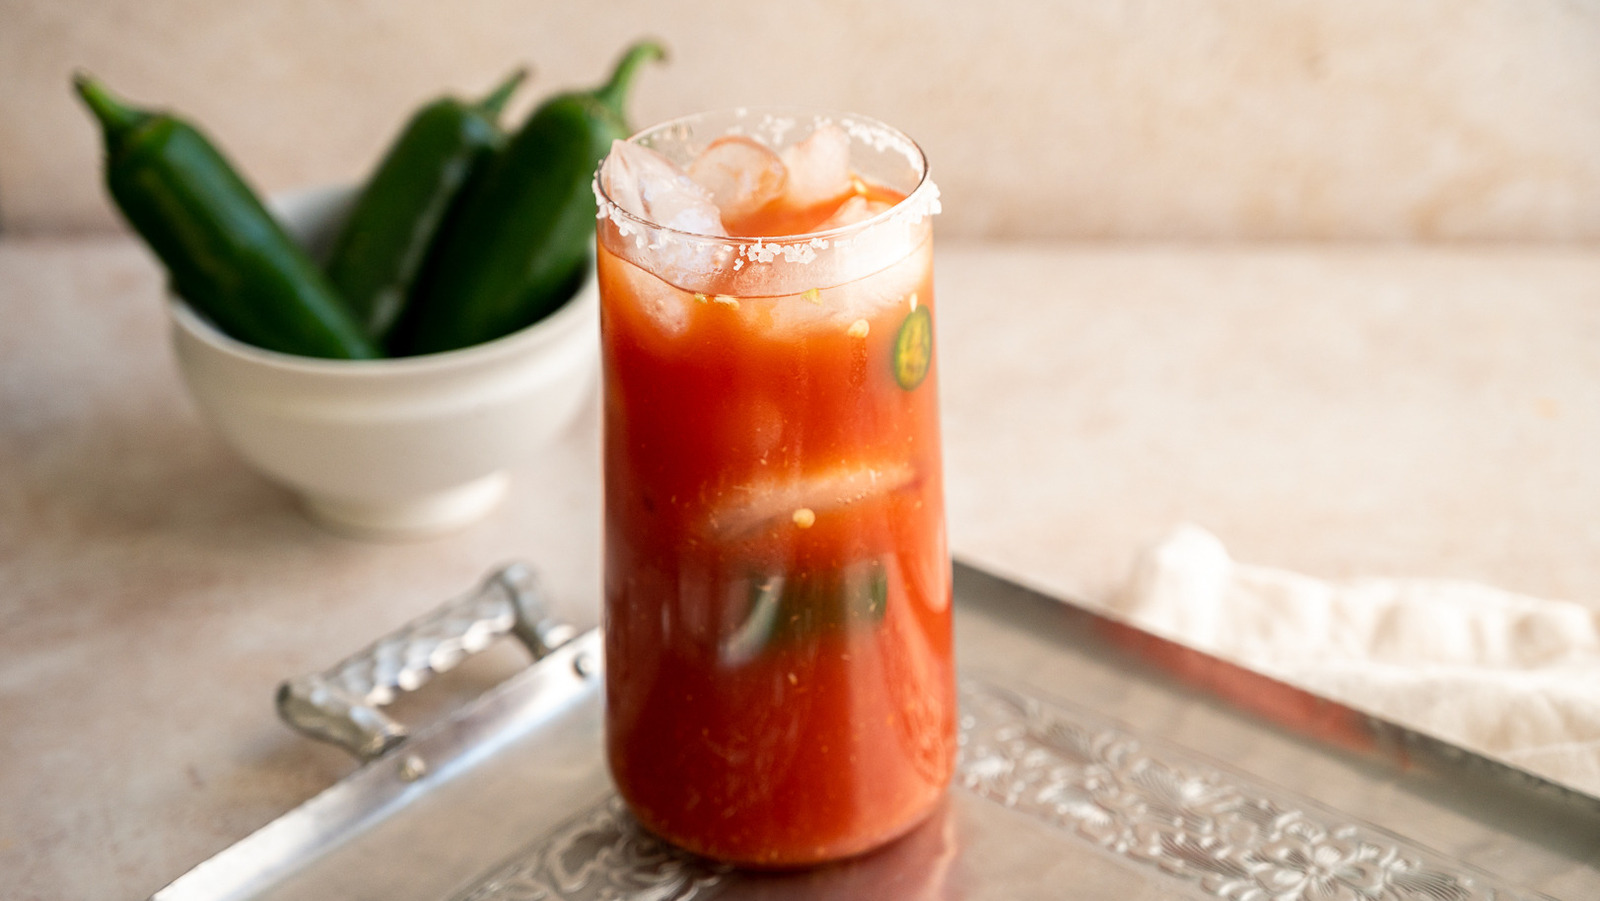 https://www.thedailymeal.com/img/gallery/spicy-bloody-mary-recipe/l-intro-1669854953.jpg